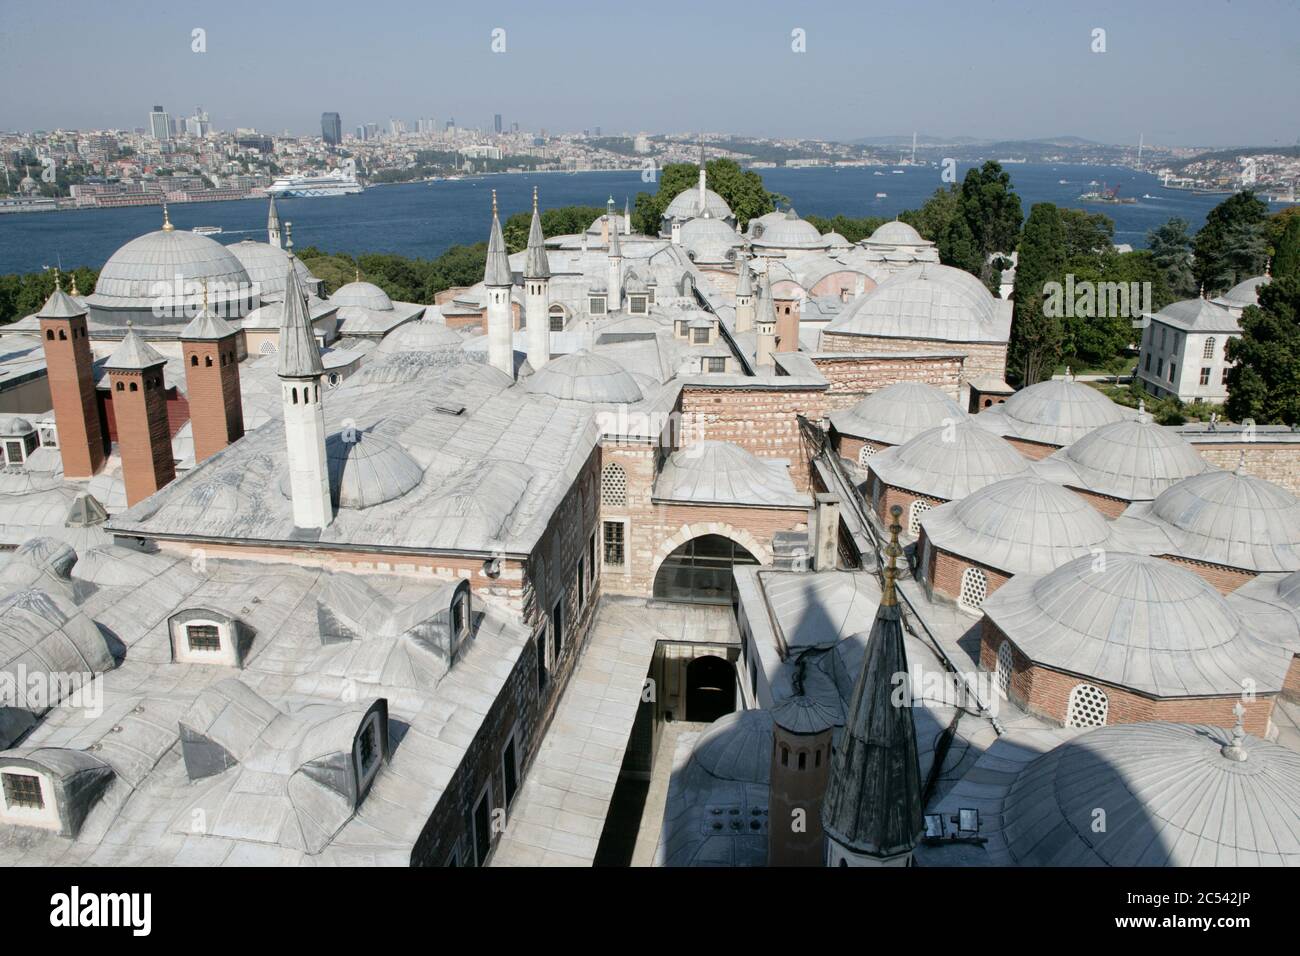 Istanbul: view over roofs of Topkapi / Golden Horn Stock Photo